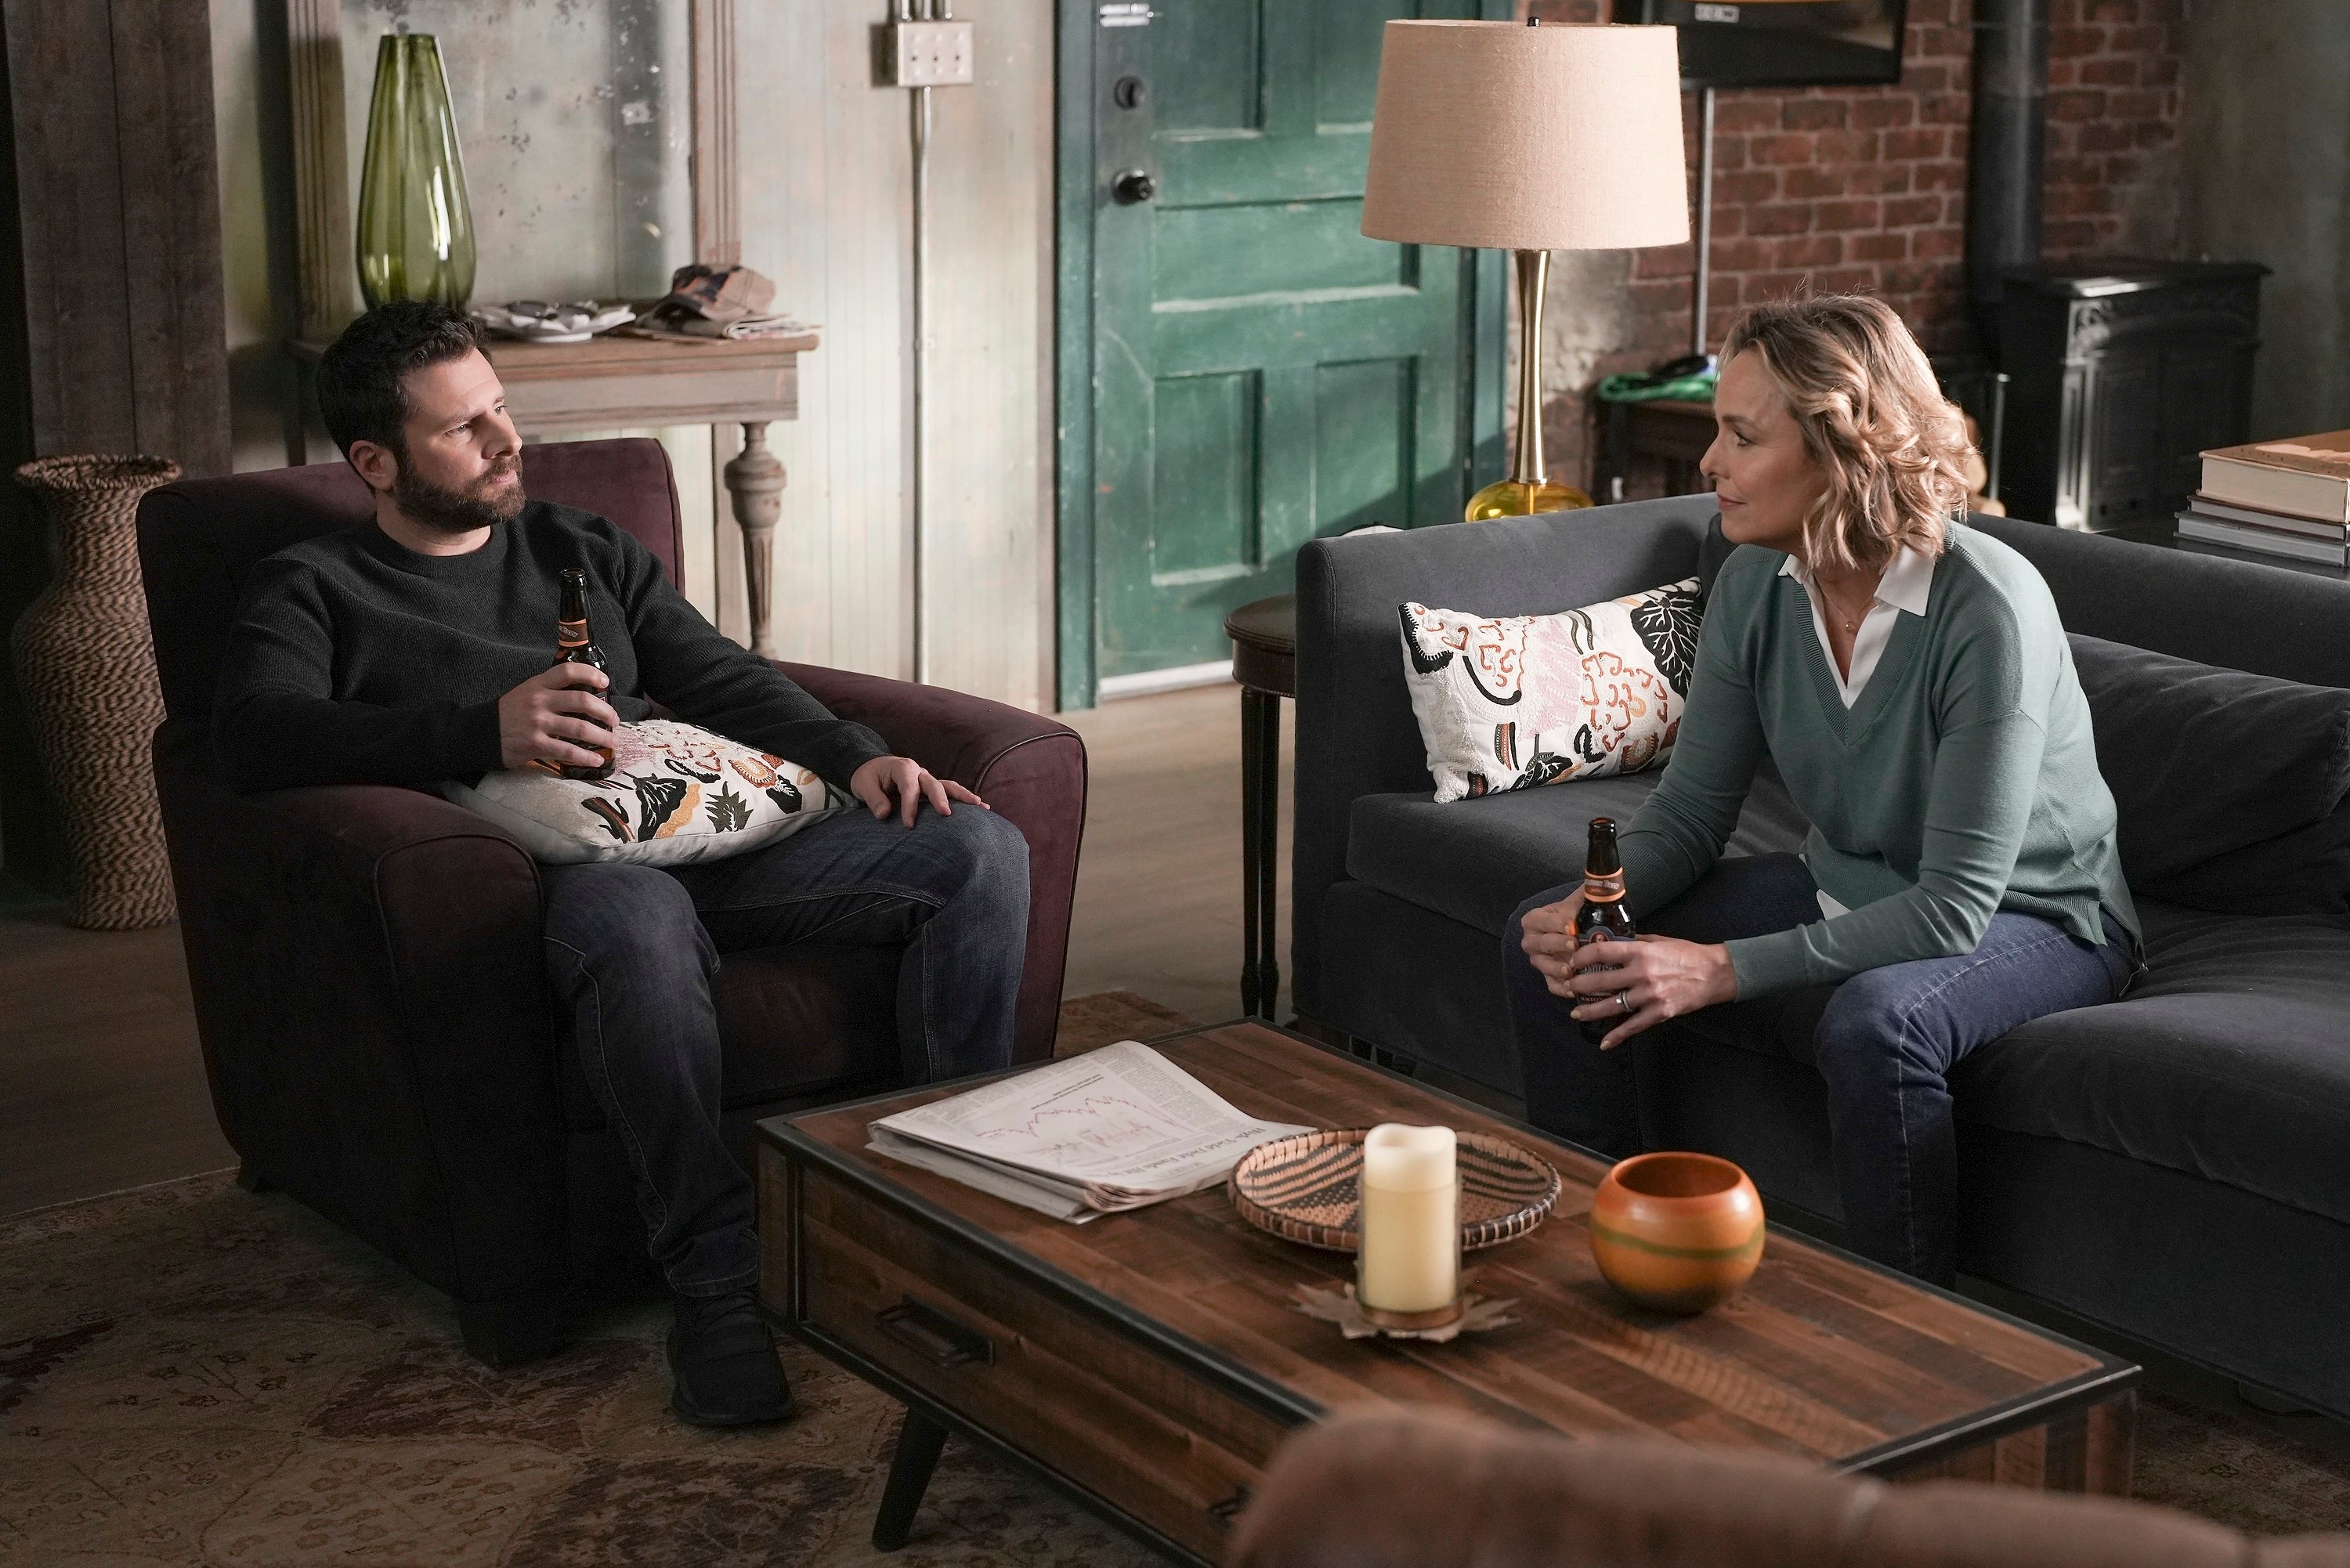 'A Million Little Things': James Roday Rodriguez as Gary and Melora Hardin as Maggie's Mom, Patricia Bloom. The two sit together with beers in hand talking.